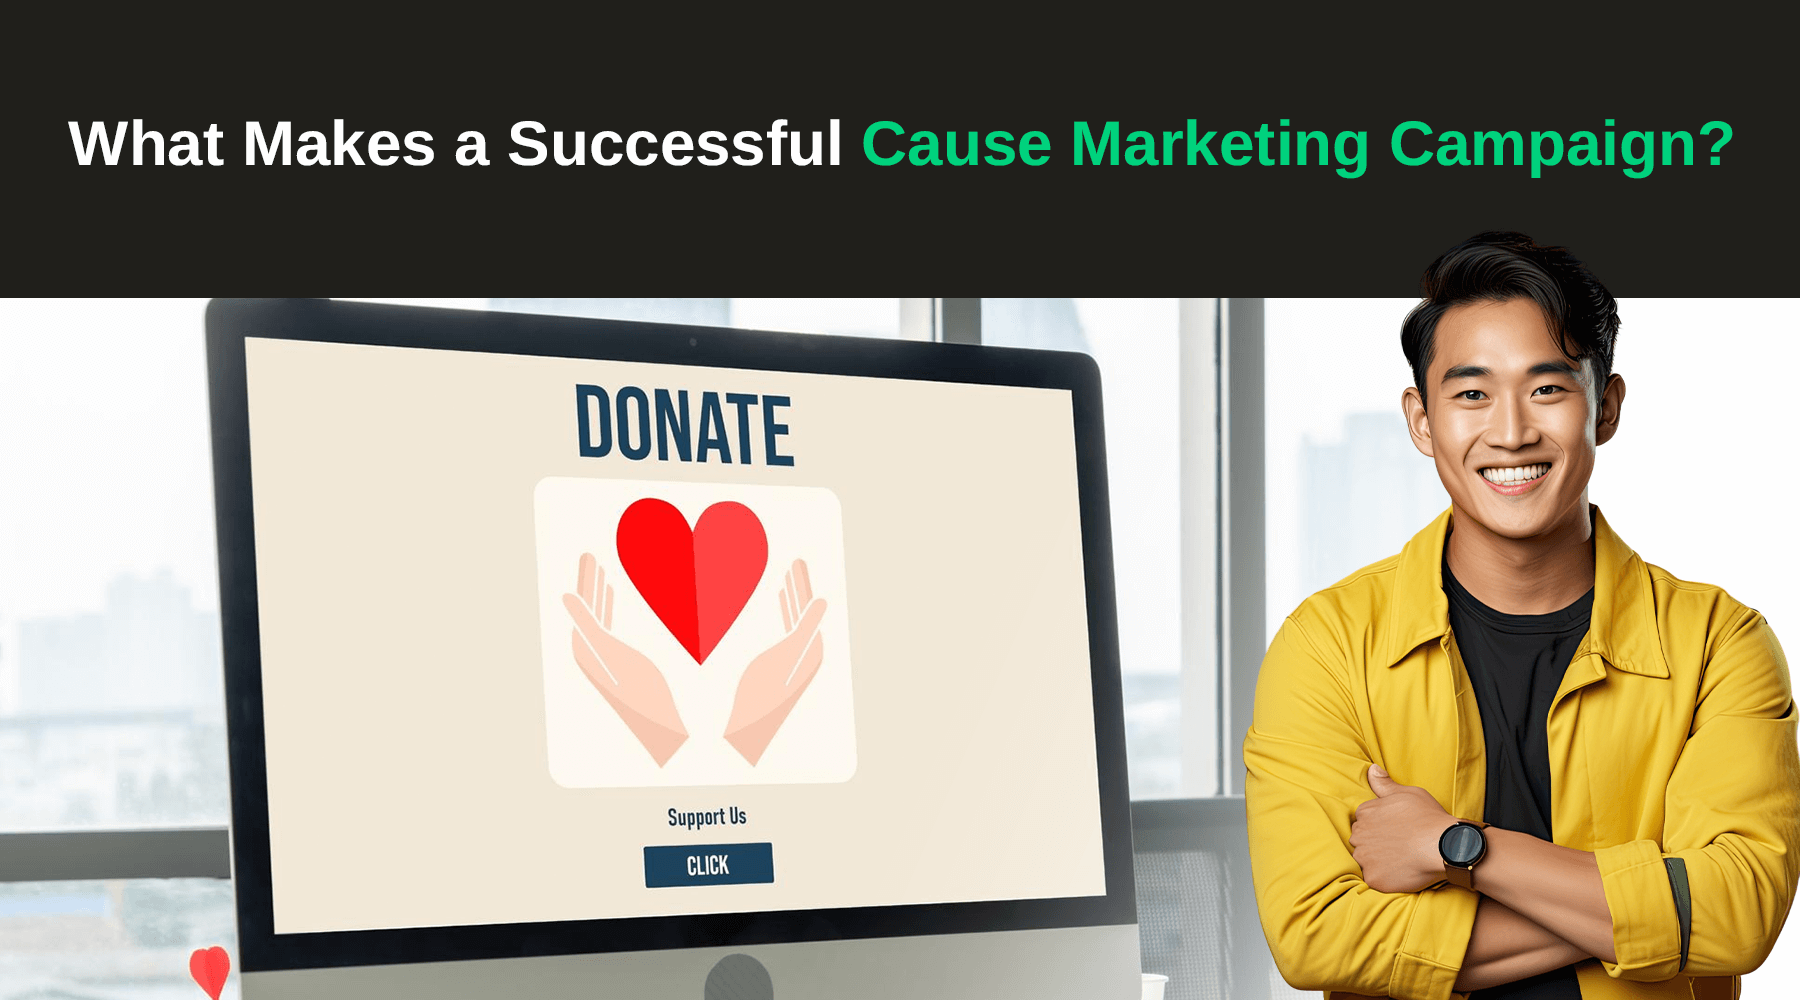 What Makes a Successful Cause Marketing Campaign?